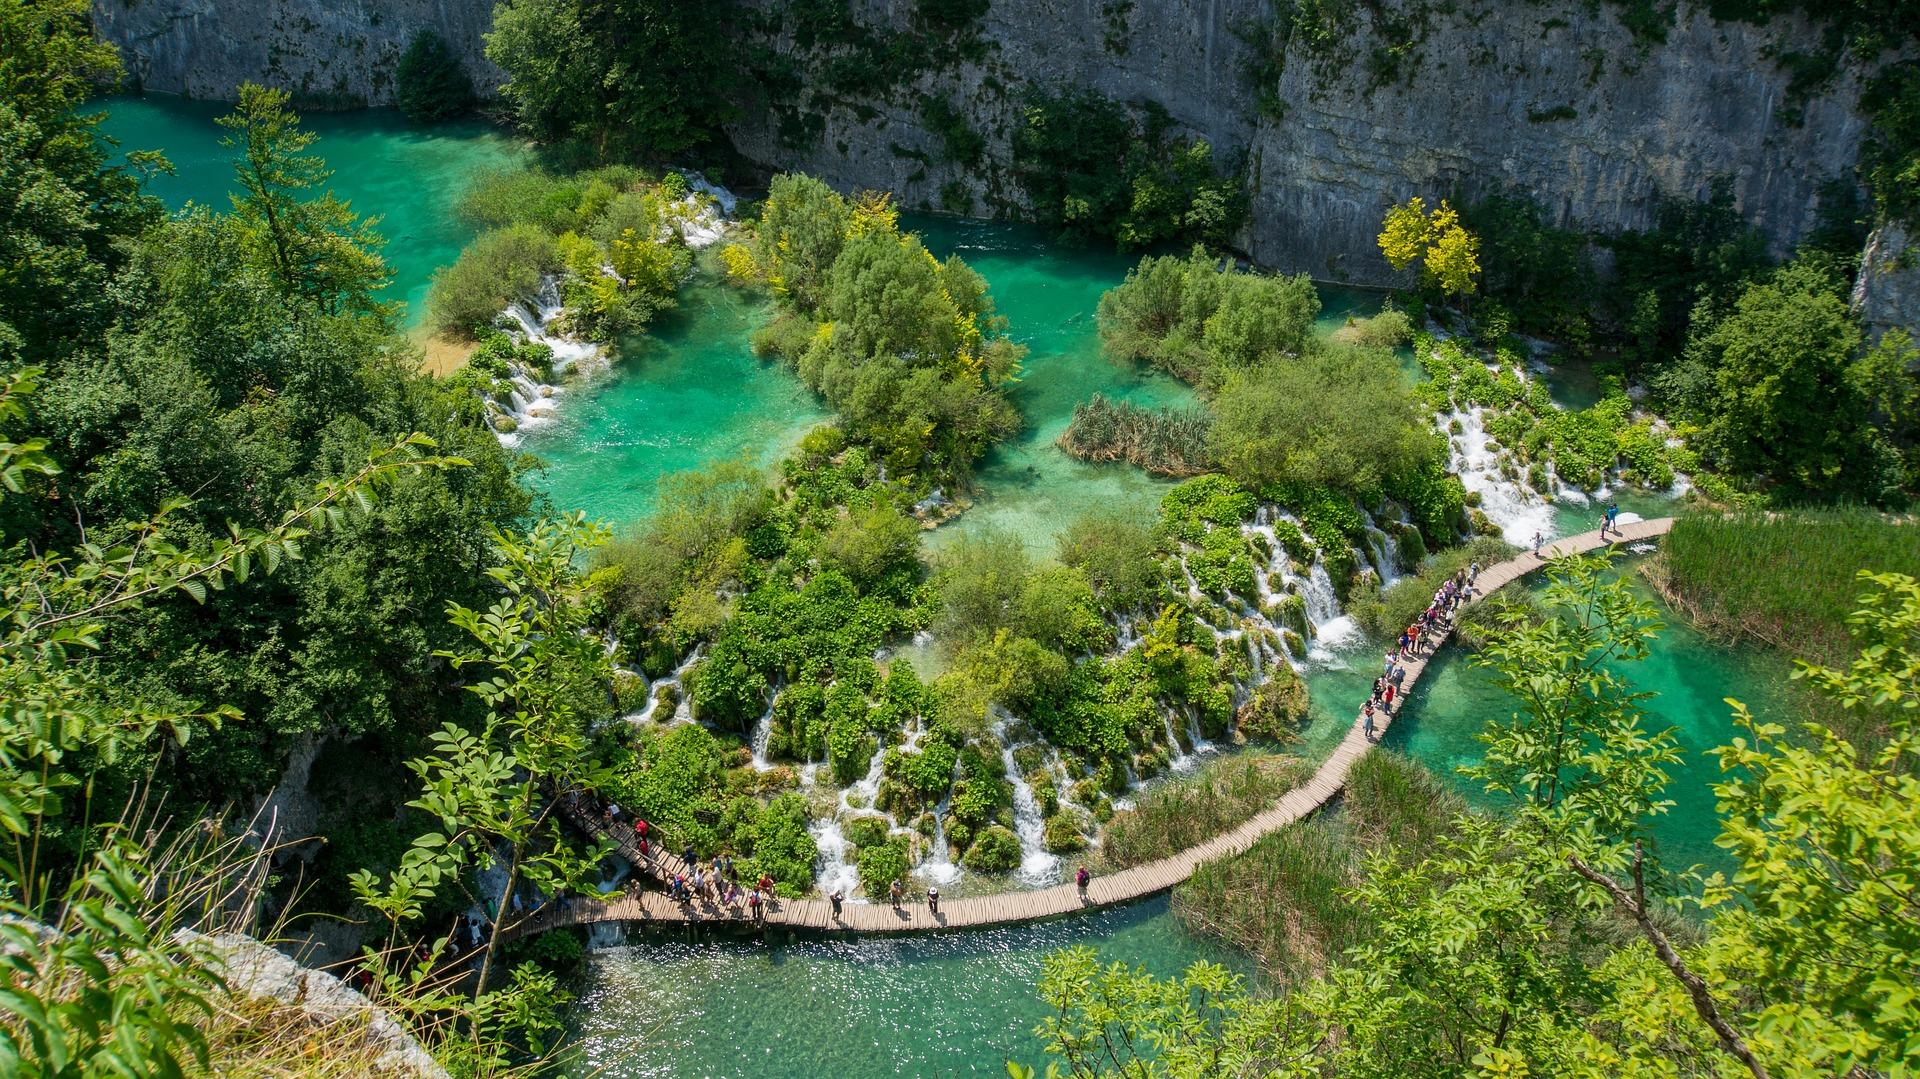 Plitvice waterfalls from bird perspective. Greenish blue lakes blended with green trees and a path for hiking in the middle.